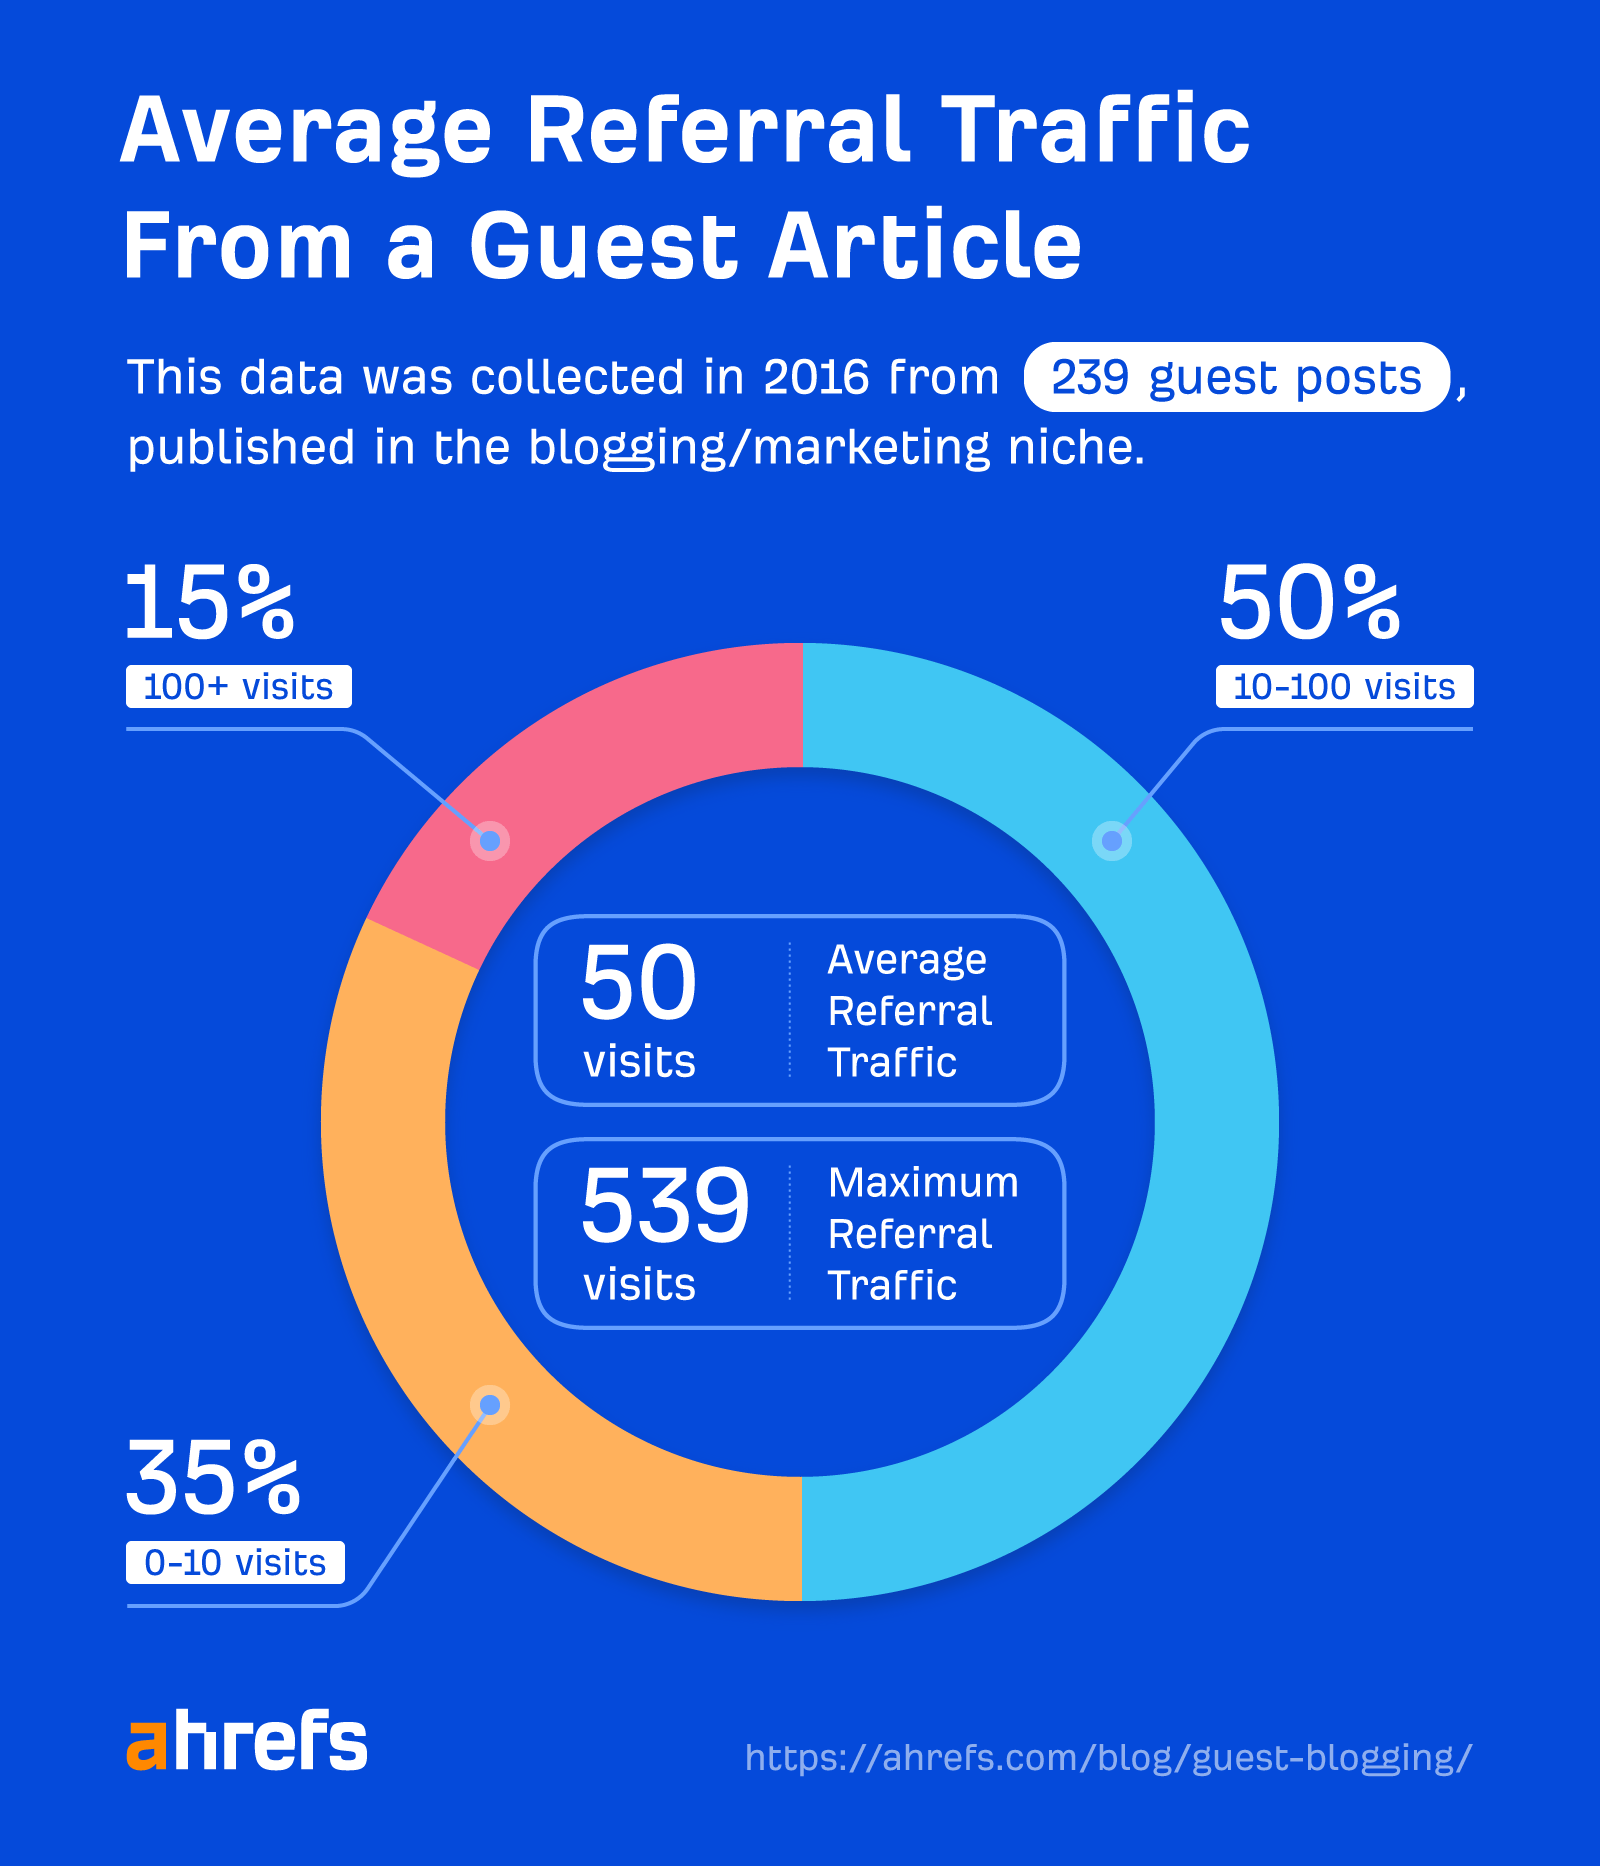 Average referral traffic from a guest article